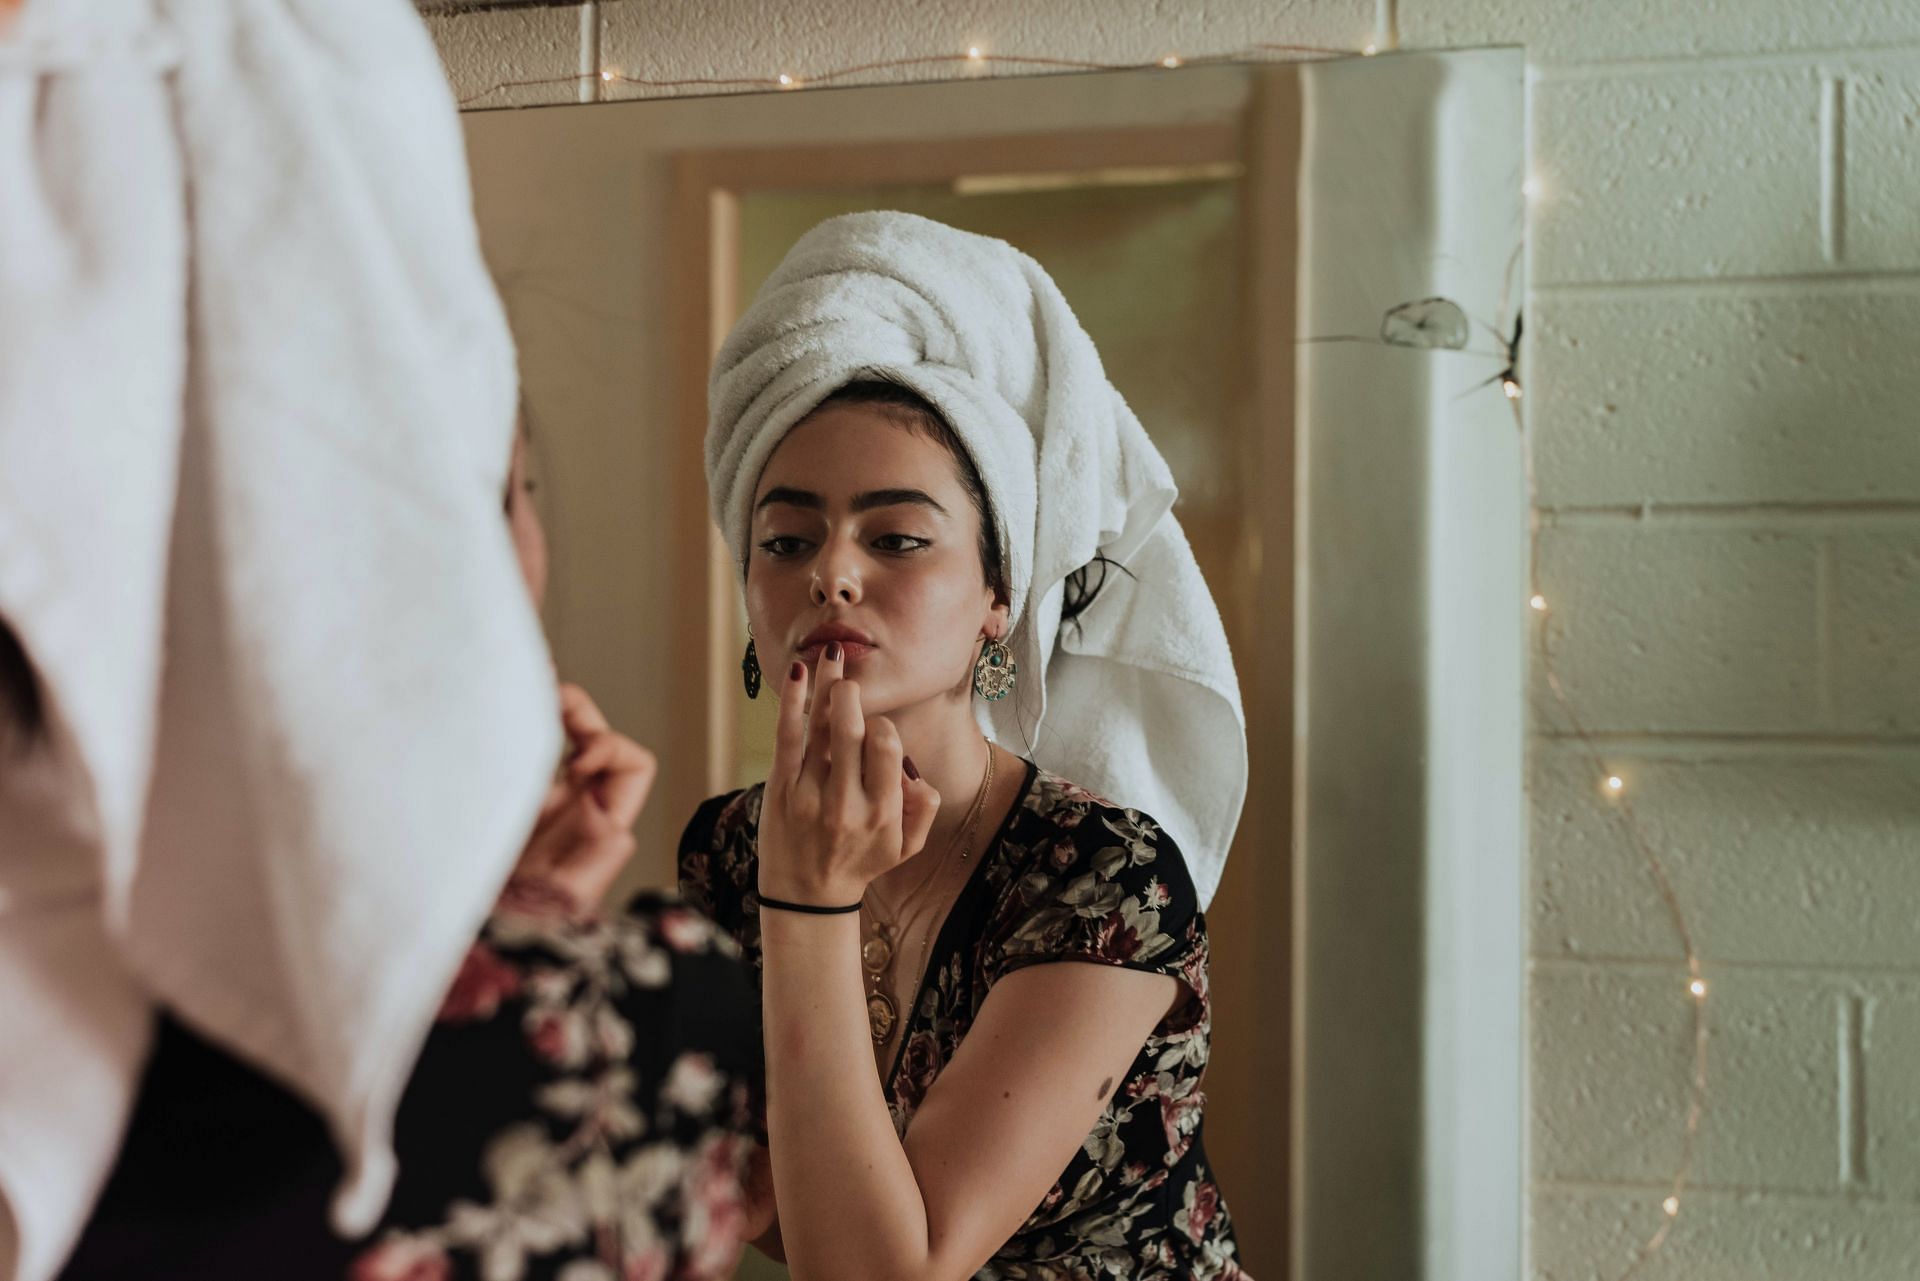 Niacinamide can protect the skin barrier. (Image via Unsplash/Kevin Laminto)